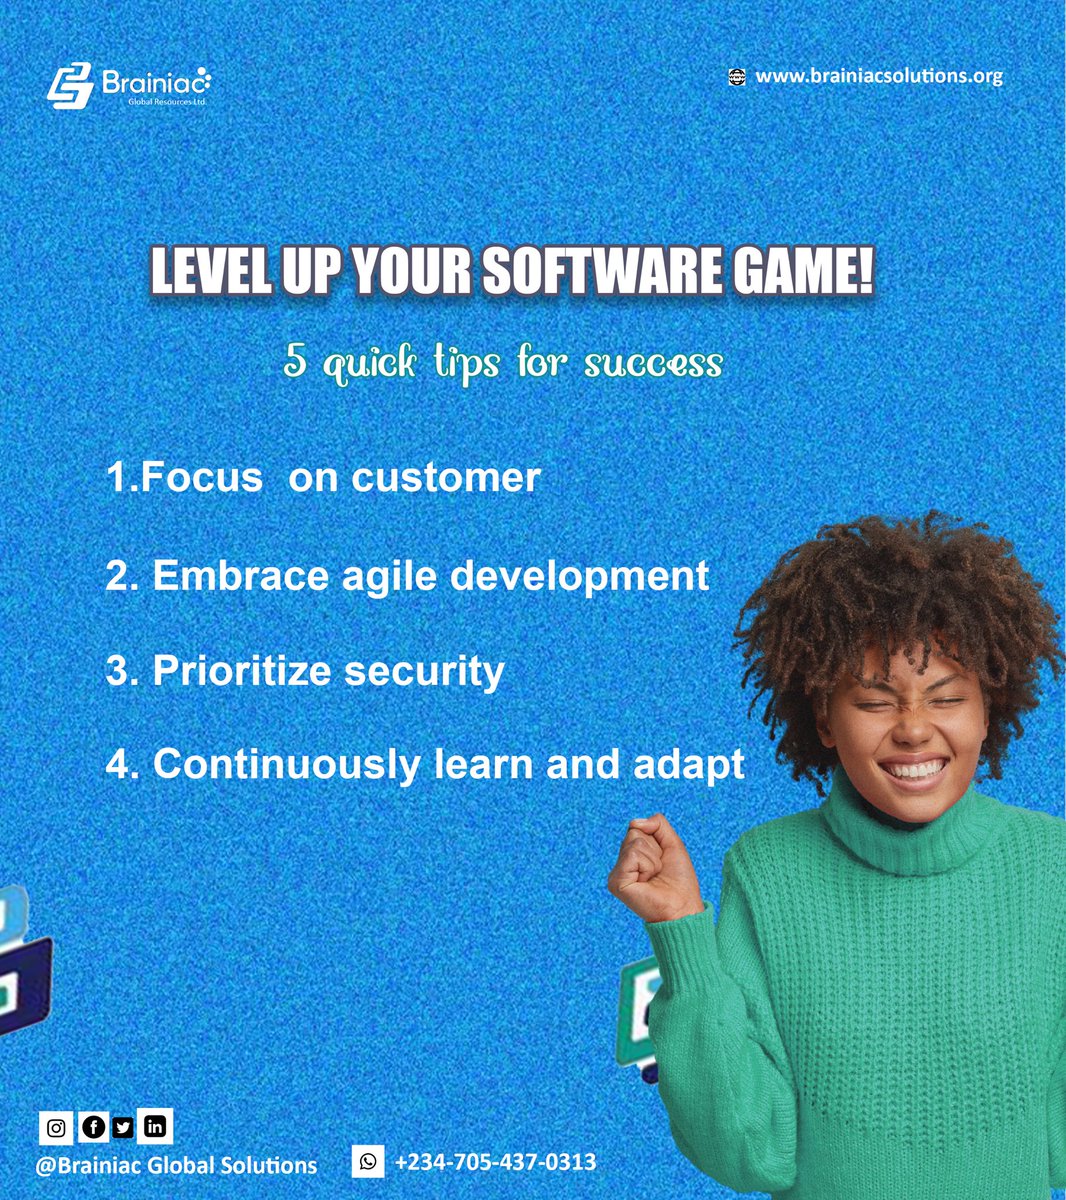 Master the Code: Elevate Your Software Skills with These 5 Key Principles!

#SoftwareSuccess #CustomerFirst #AgileDevelopment #SecurityPriority #ContinuousLearning #CodeMastery #brainiacglobal